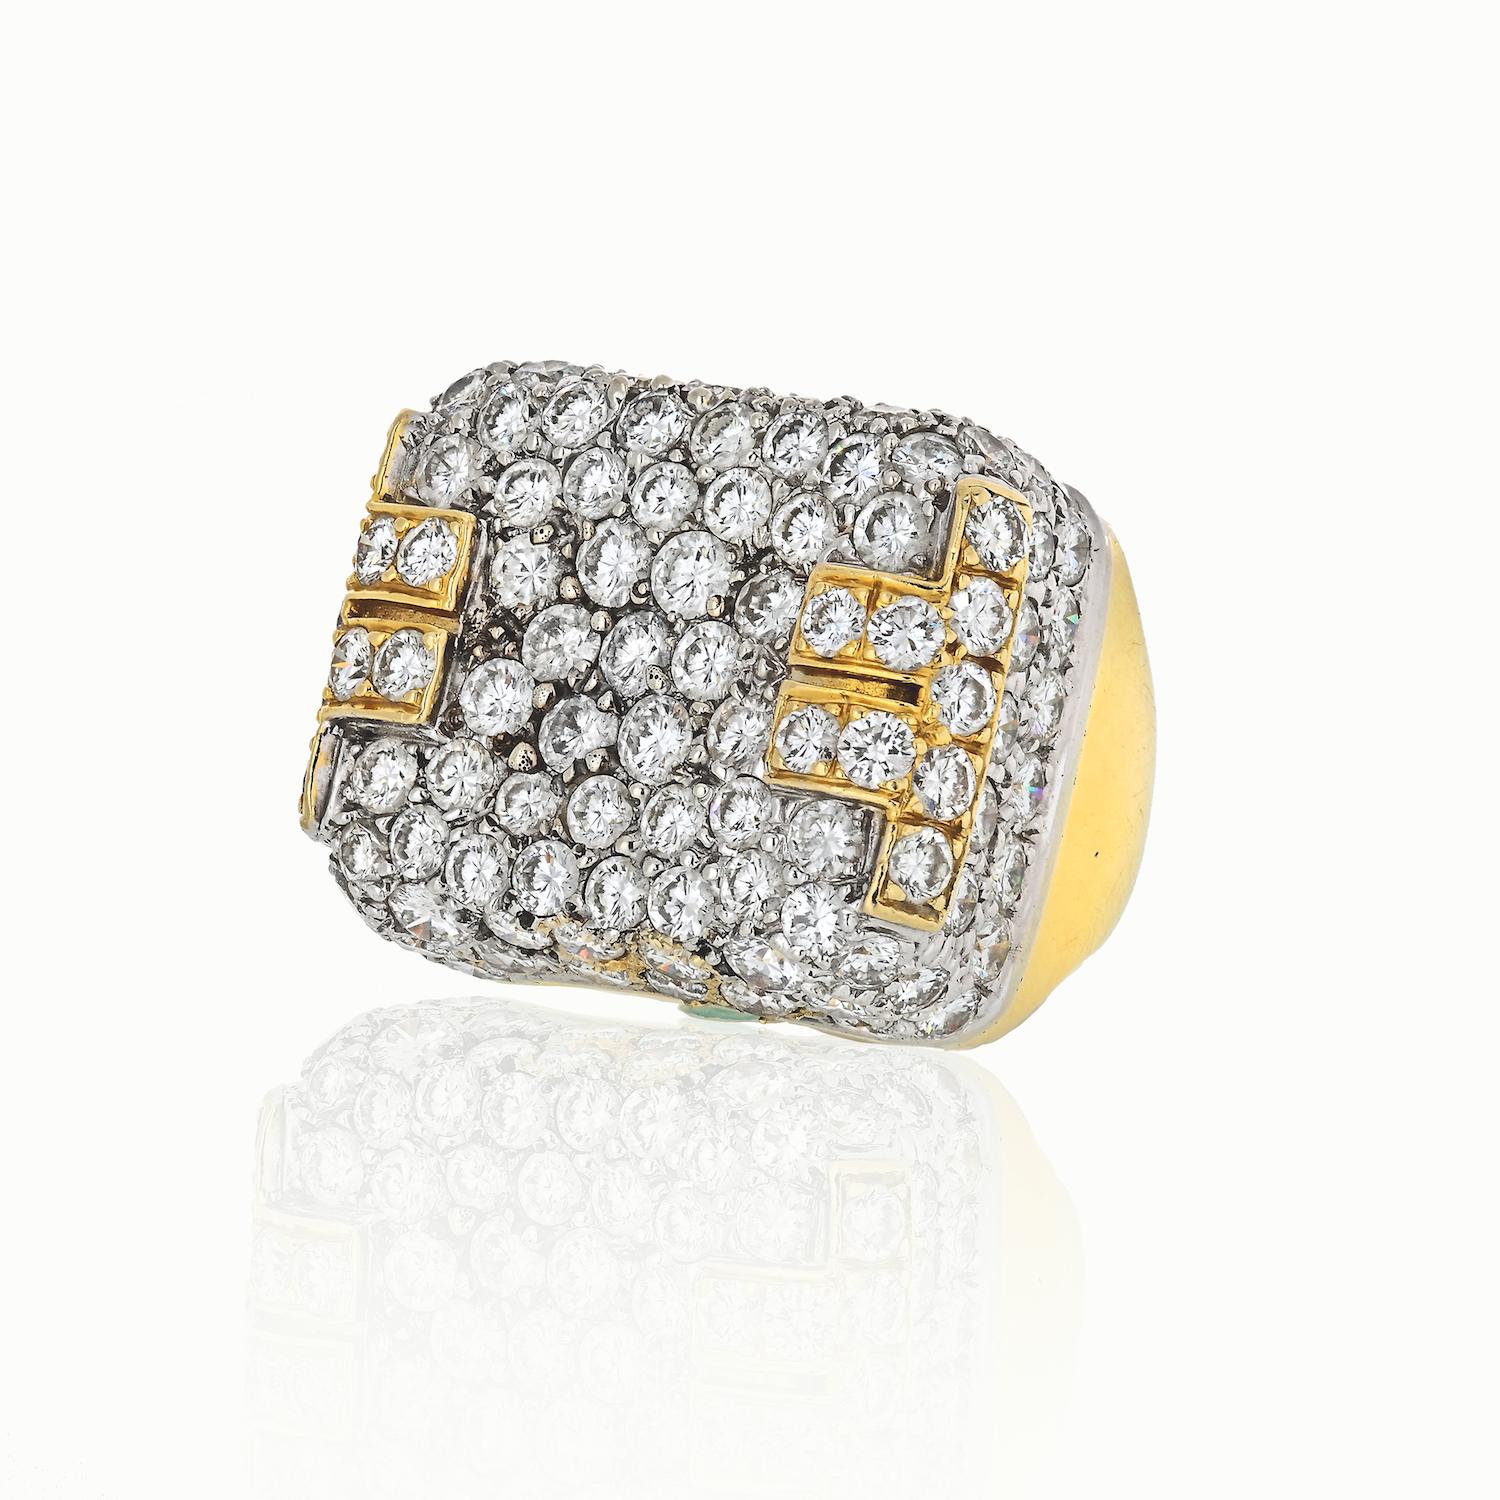 Absolutely Breathtaking World Renowned Master Artisan Hammerman Brothers 10.00ctw IDEAL COLORLESS FLAWLESS Round Brilliant cut Diamond 18k Yellow Gold Ring From Their Royal Pave Collection. This masterpiece comprises of 126 natural ideal cut